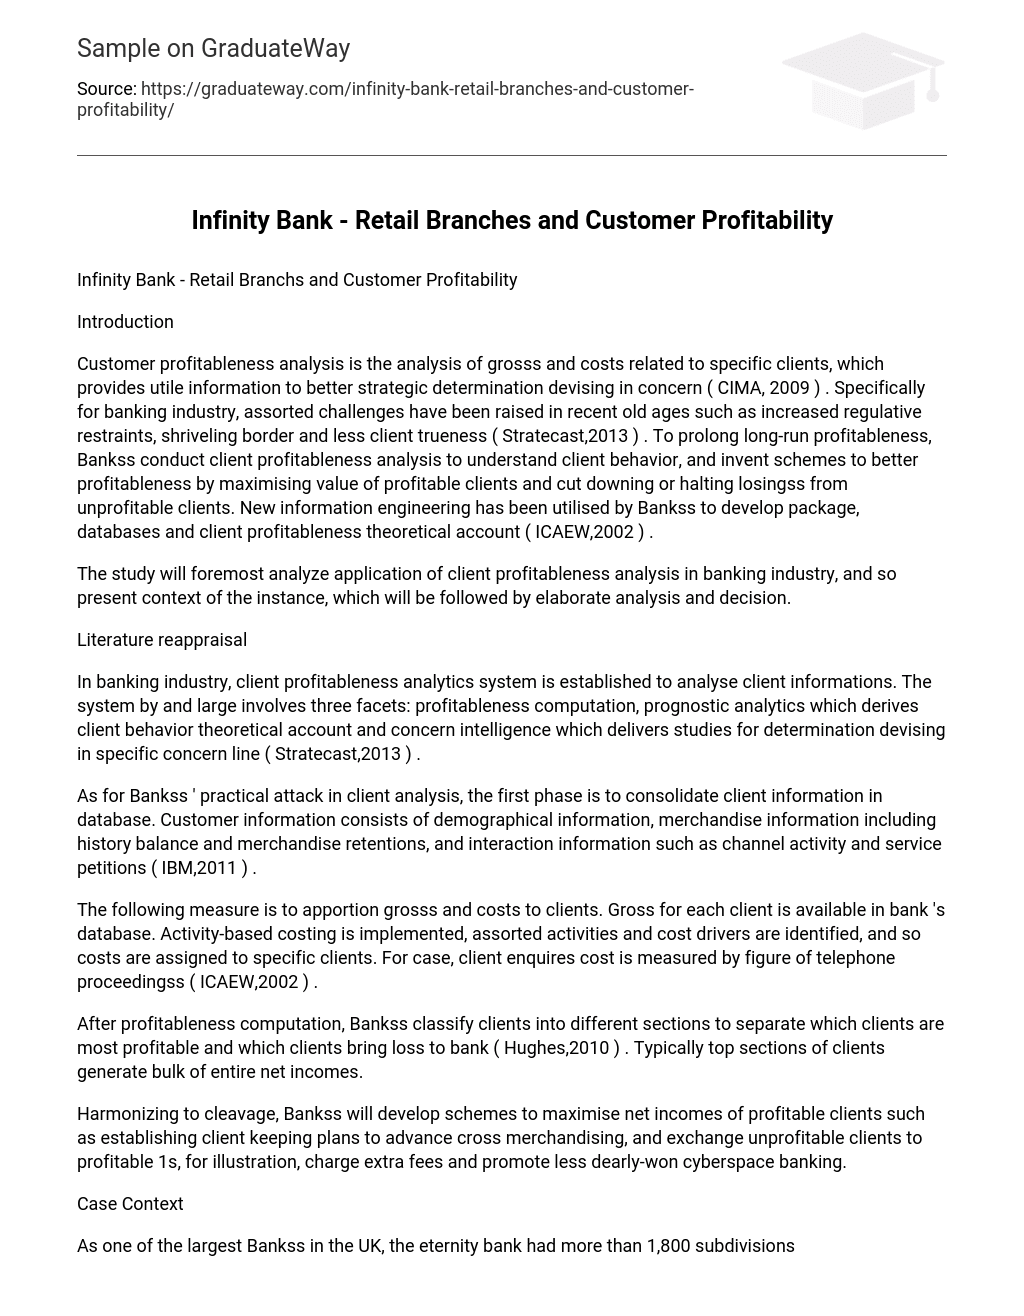 Infinity Bank – Retail Branches and Customer Profitability Analysis